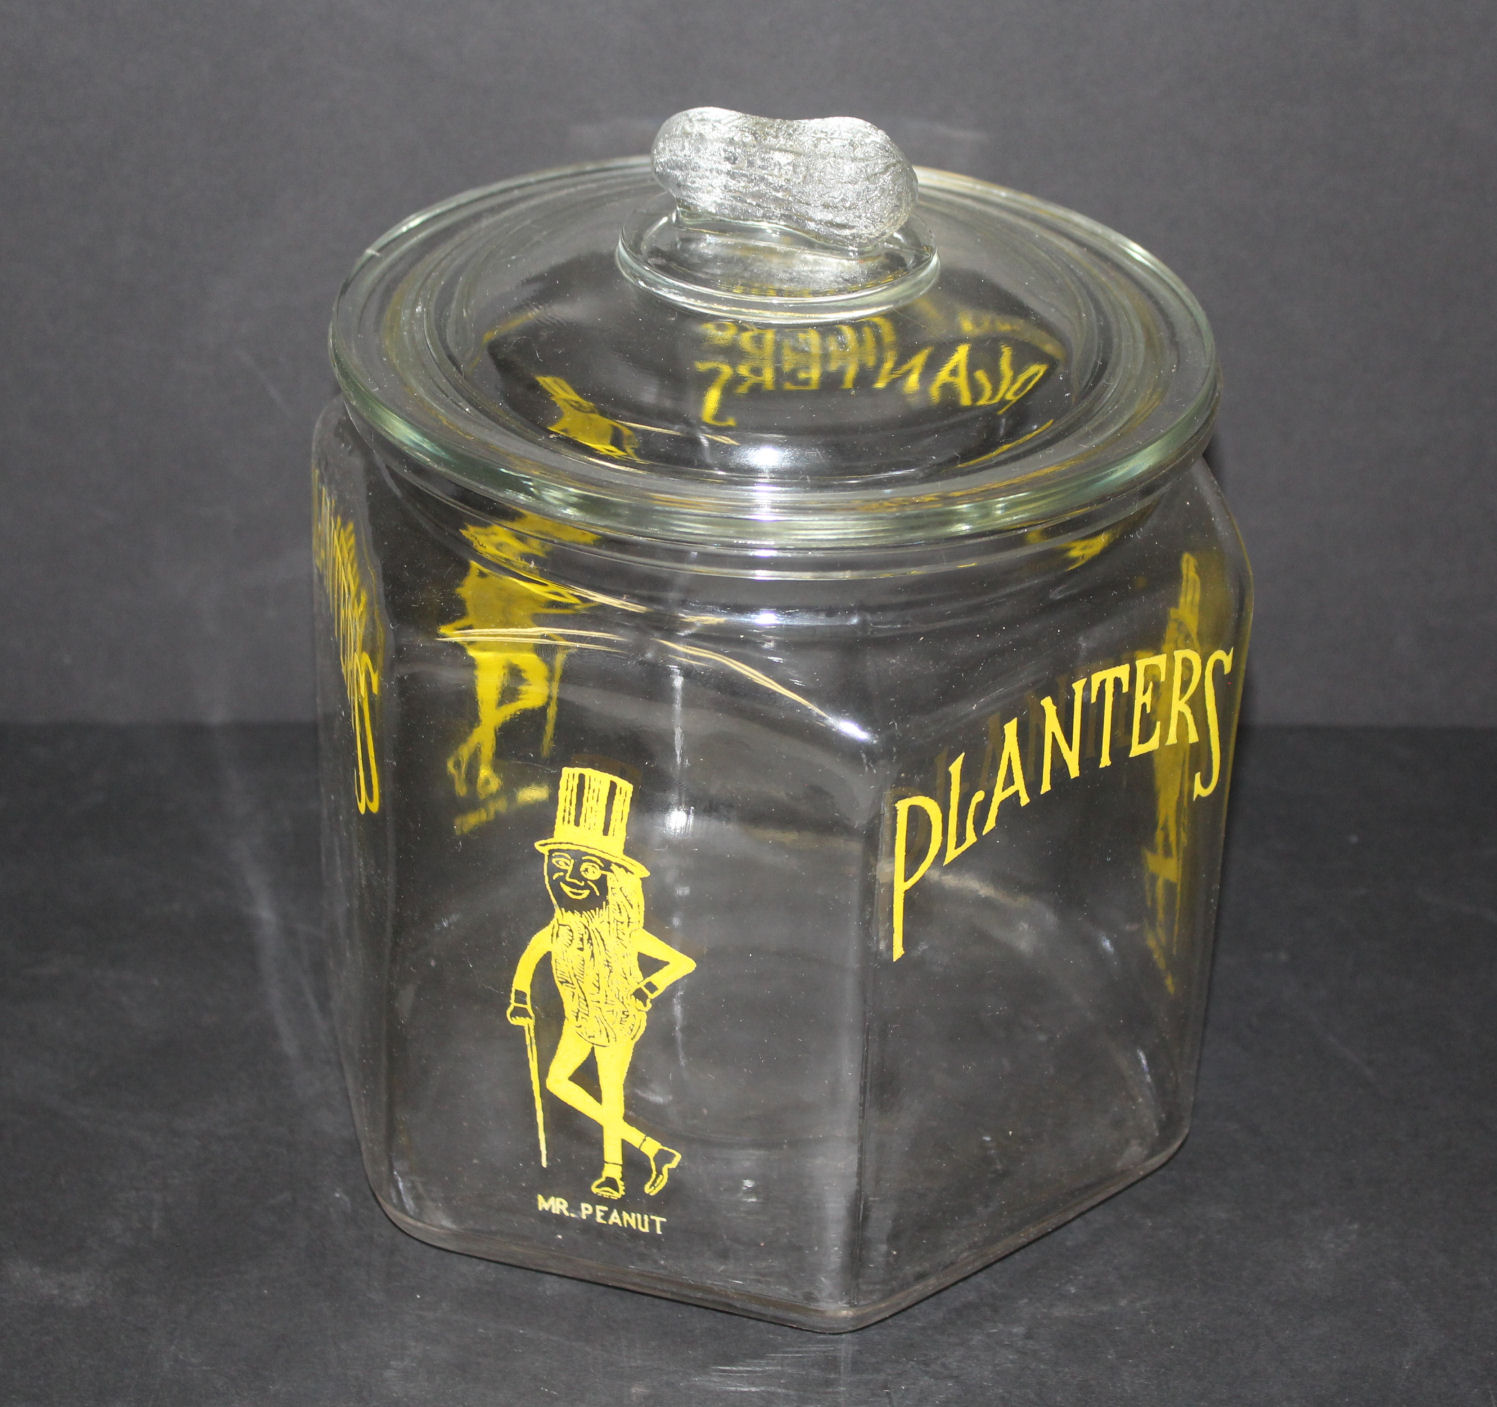 Bargain John's Antiques | Planters Peanuts Advertising Country Store Glass Hexagon ...1497 x 1407